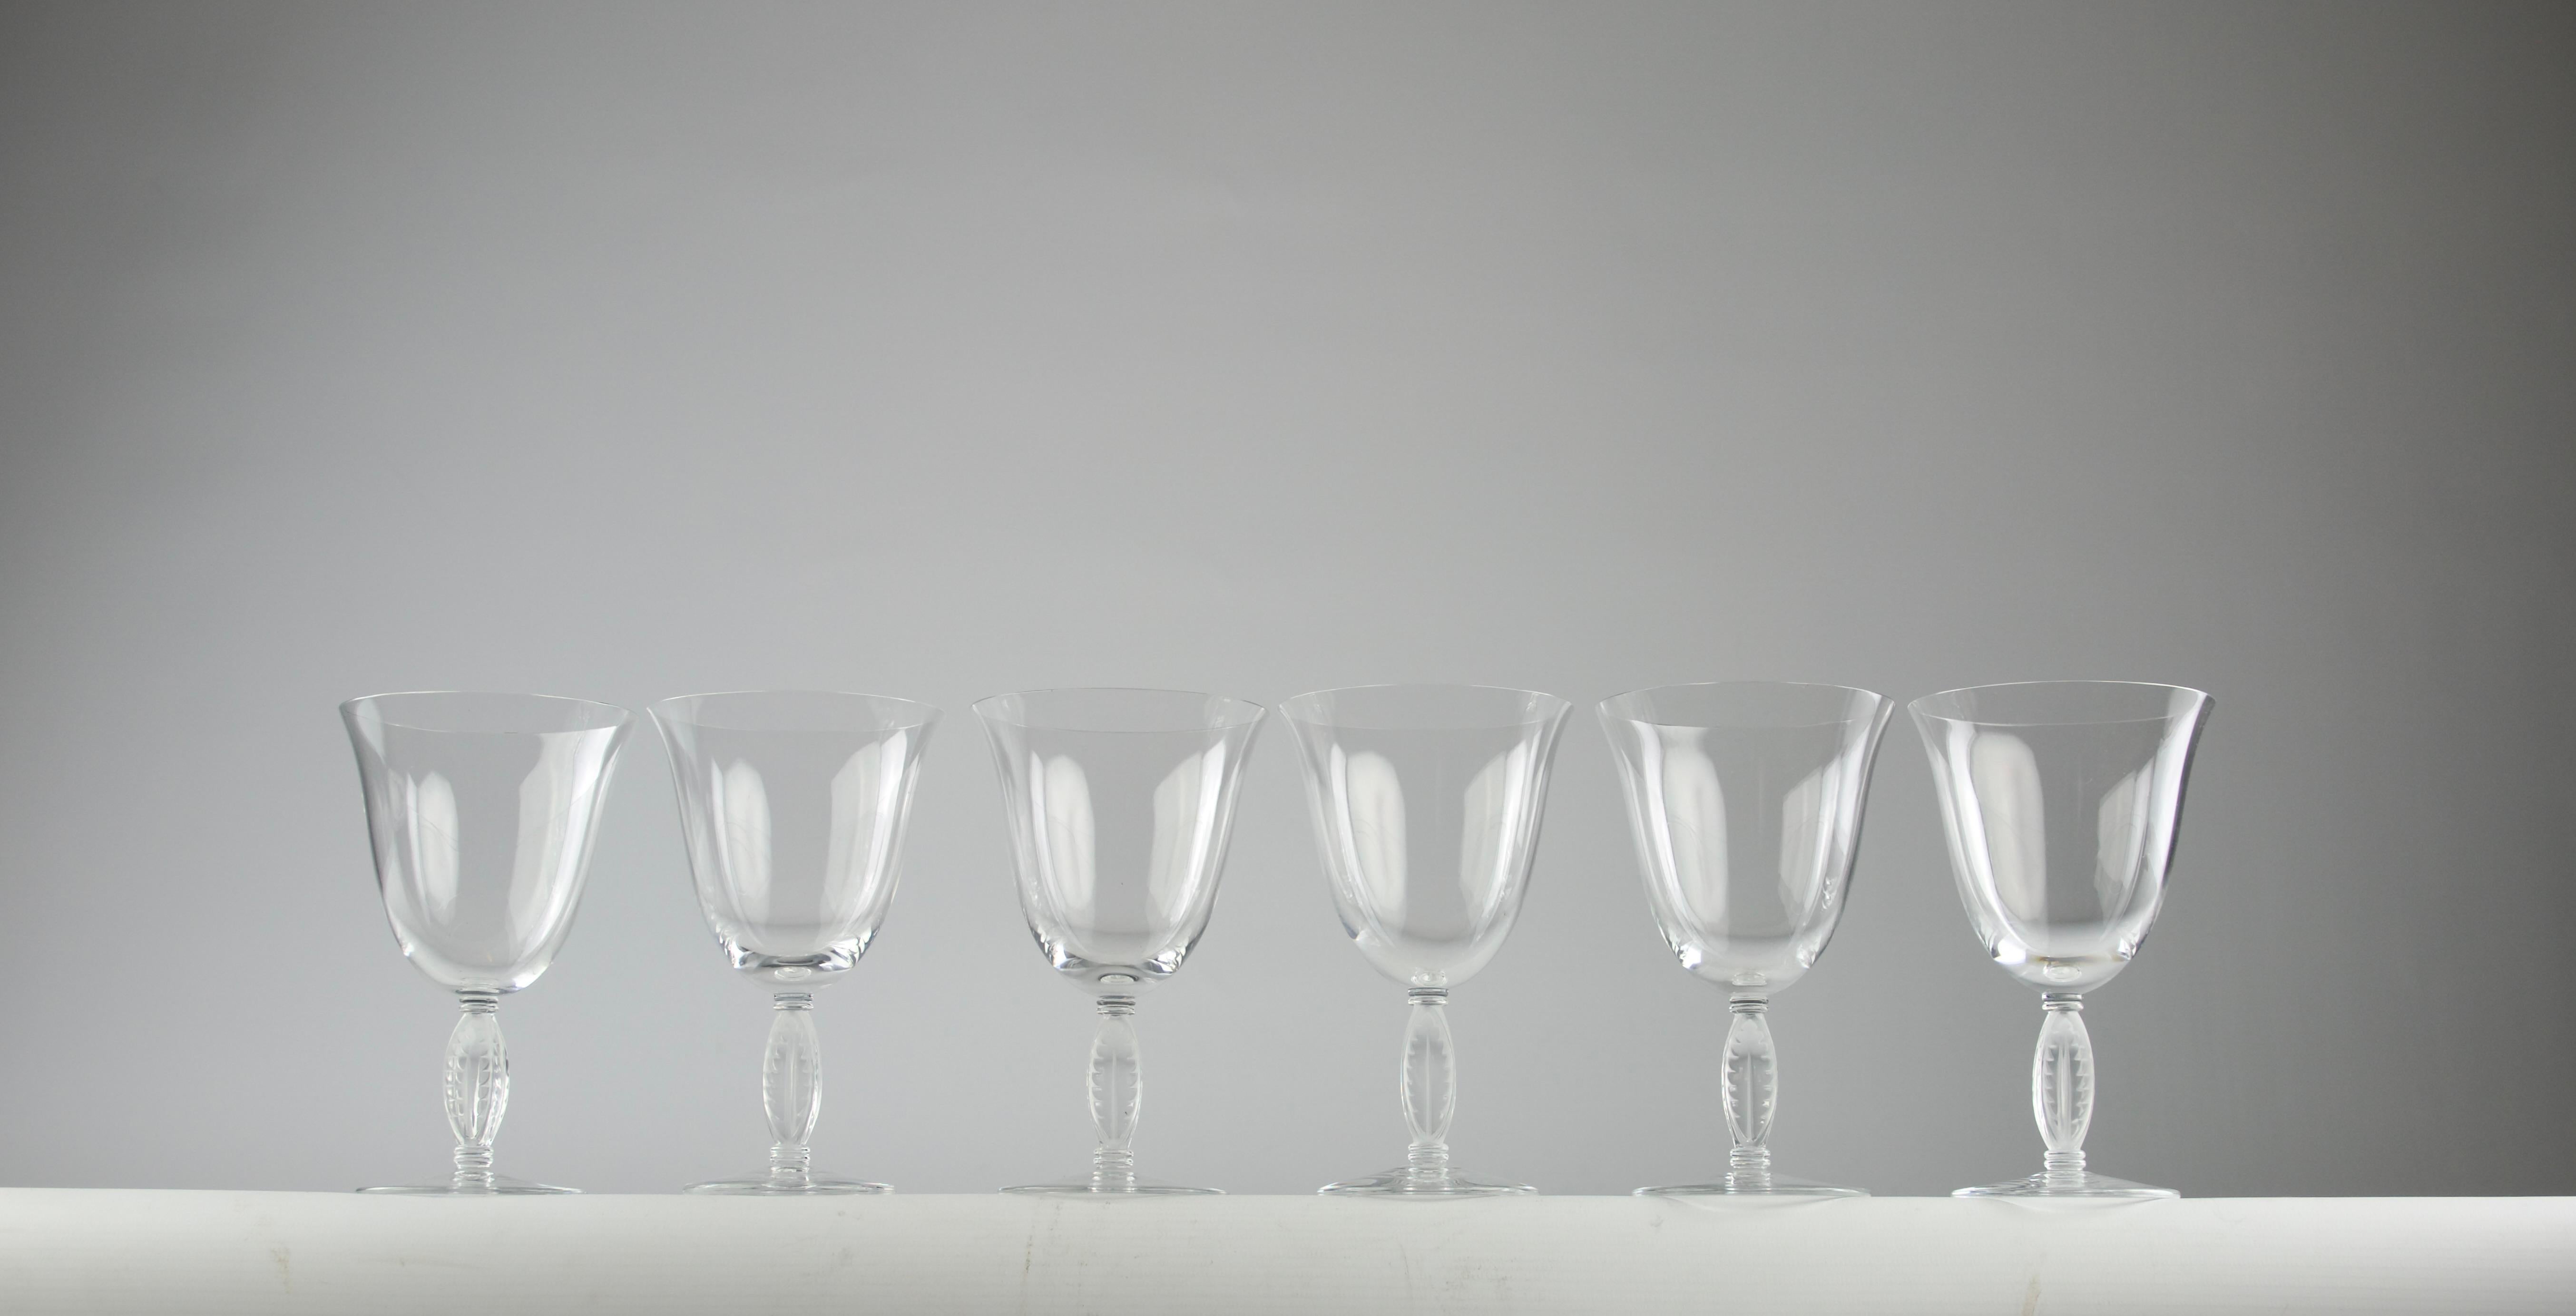 Beautiful Lalique Fontainebleau set of six red wine glasses. Other wine glasses from the same collection are available in the shop.

In very good condition.

Dimensions in cm ( H x D ) : 13 x 8

Secure shipping.

First designed by Rene Lalique in